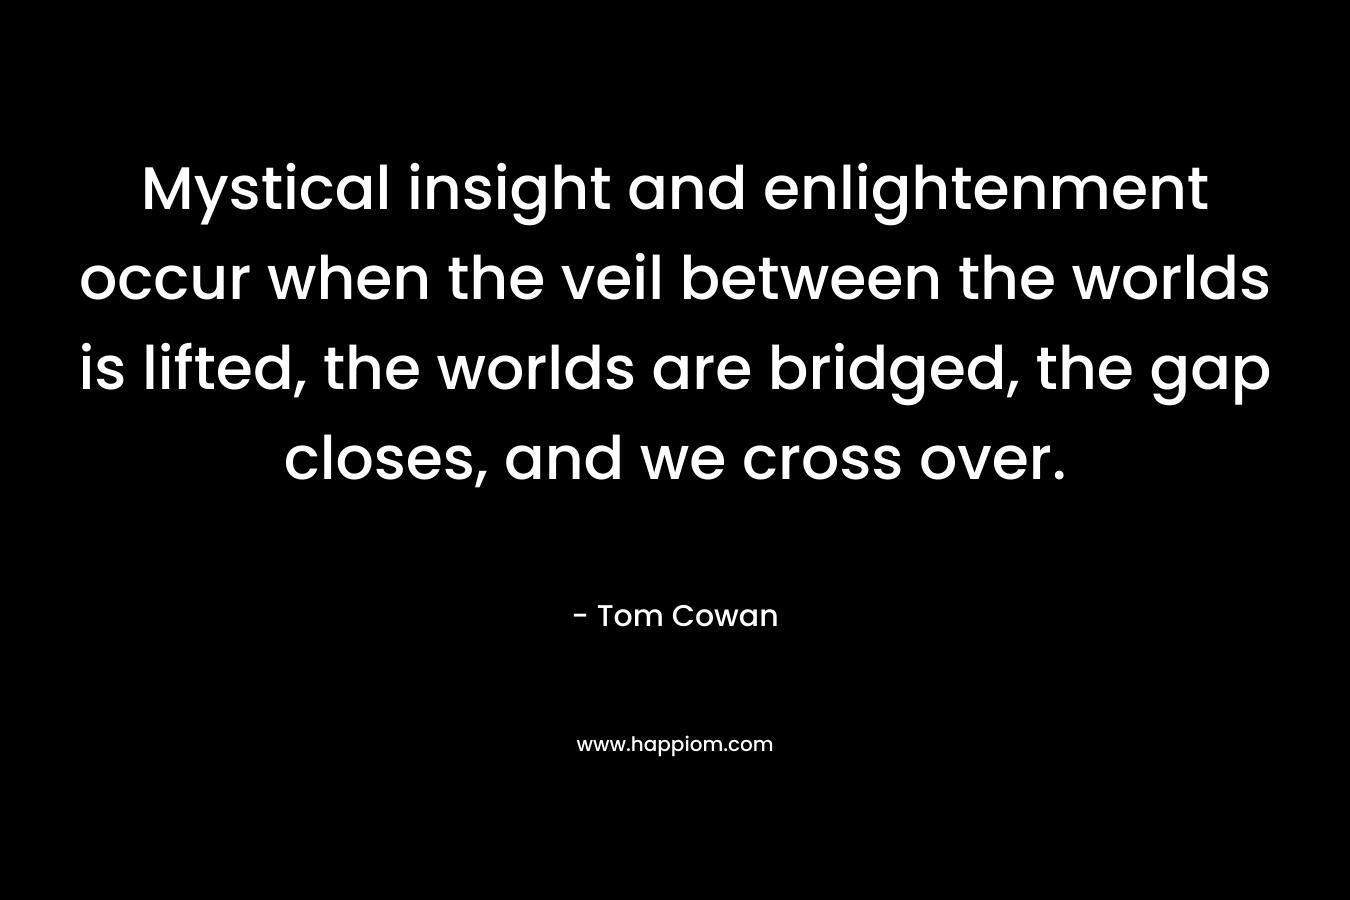 Mystical insight and enlightenment occur when the veil between the worlds is lifted, the worlds are bridged, the gap closes, and we cross over. – Tom Cowan